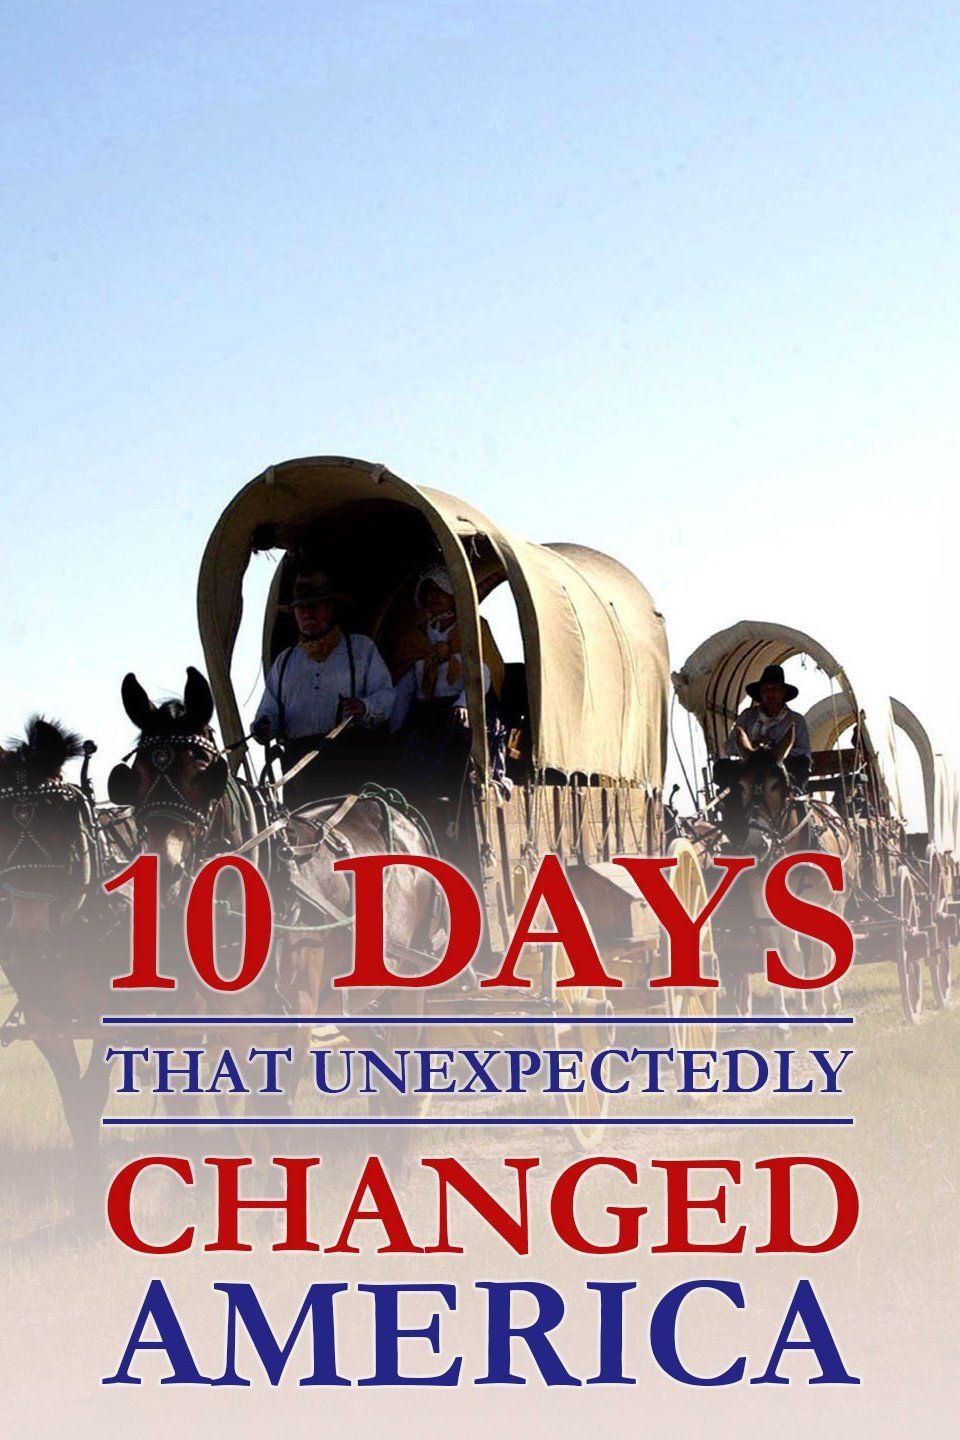 10 Days That Unexpectedly Changed America TVmaze